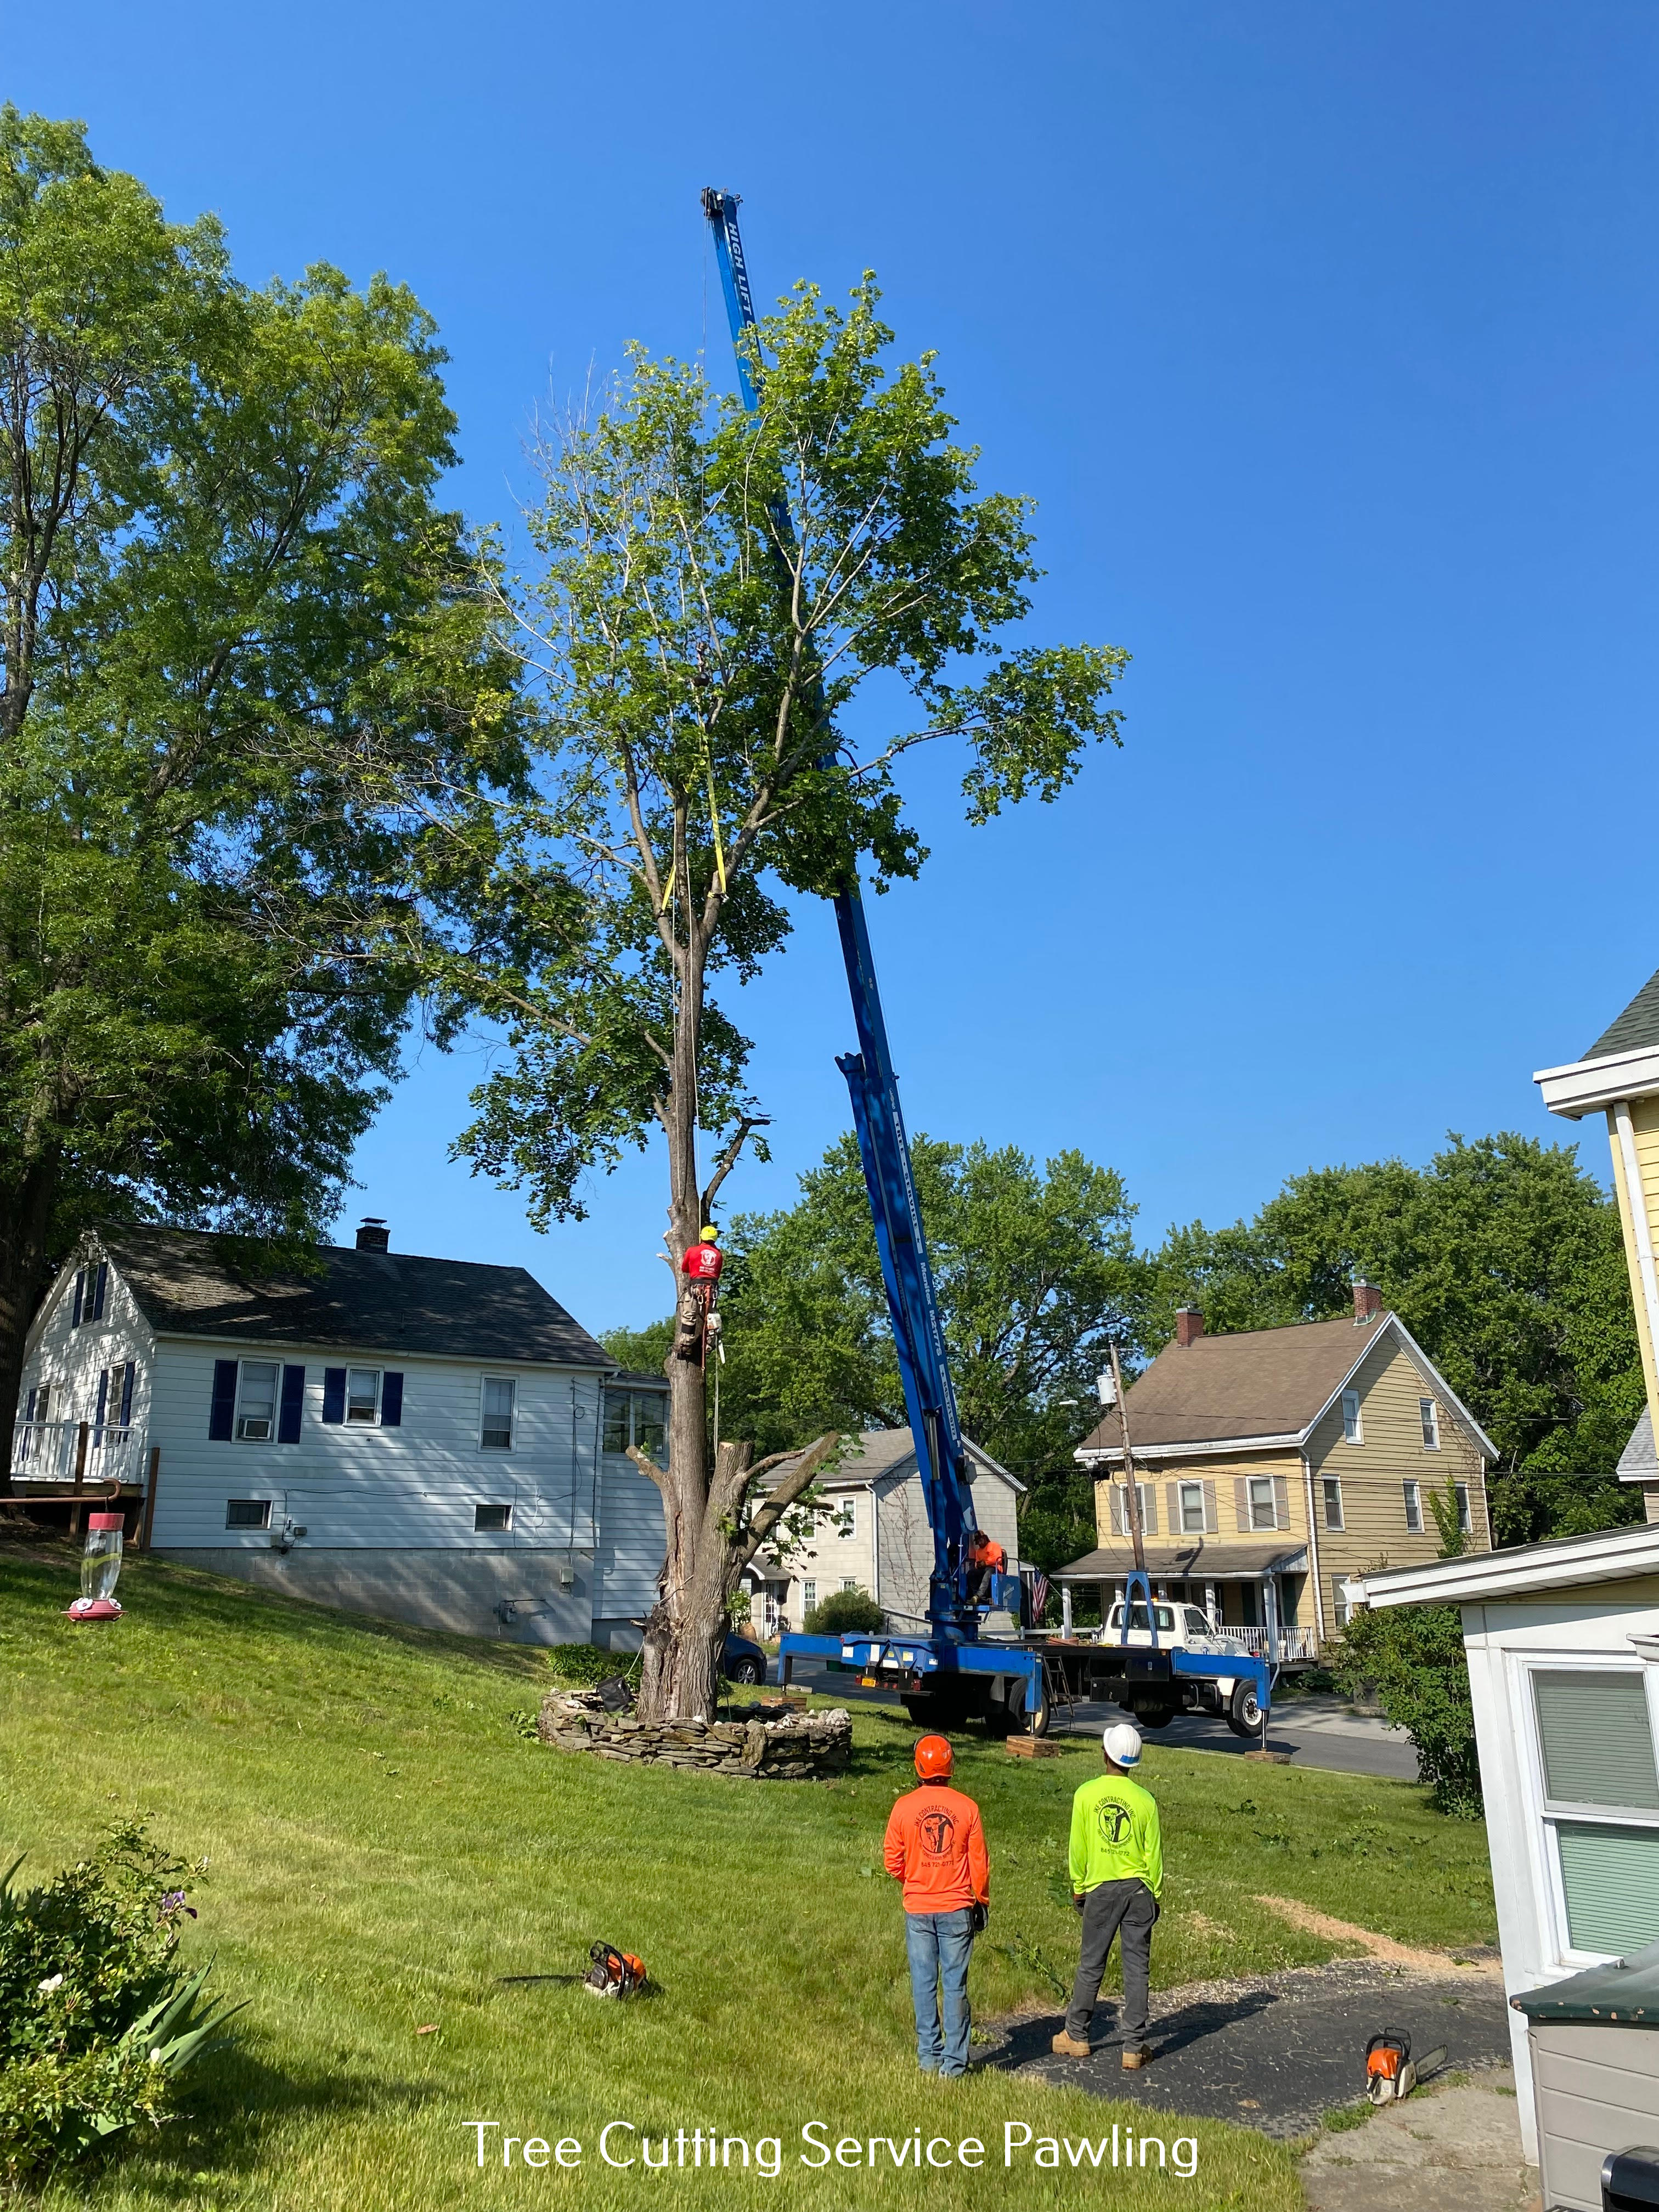 JKE Contracting, Inc. Outlines Best Practices for Secure and Effective Tree Trimming